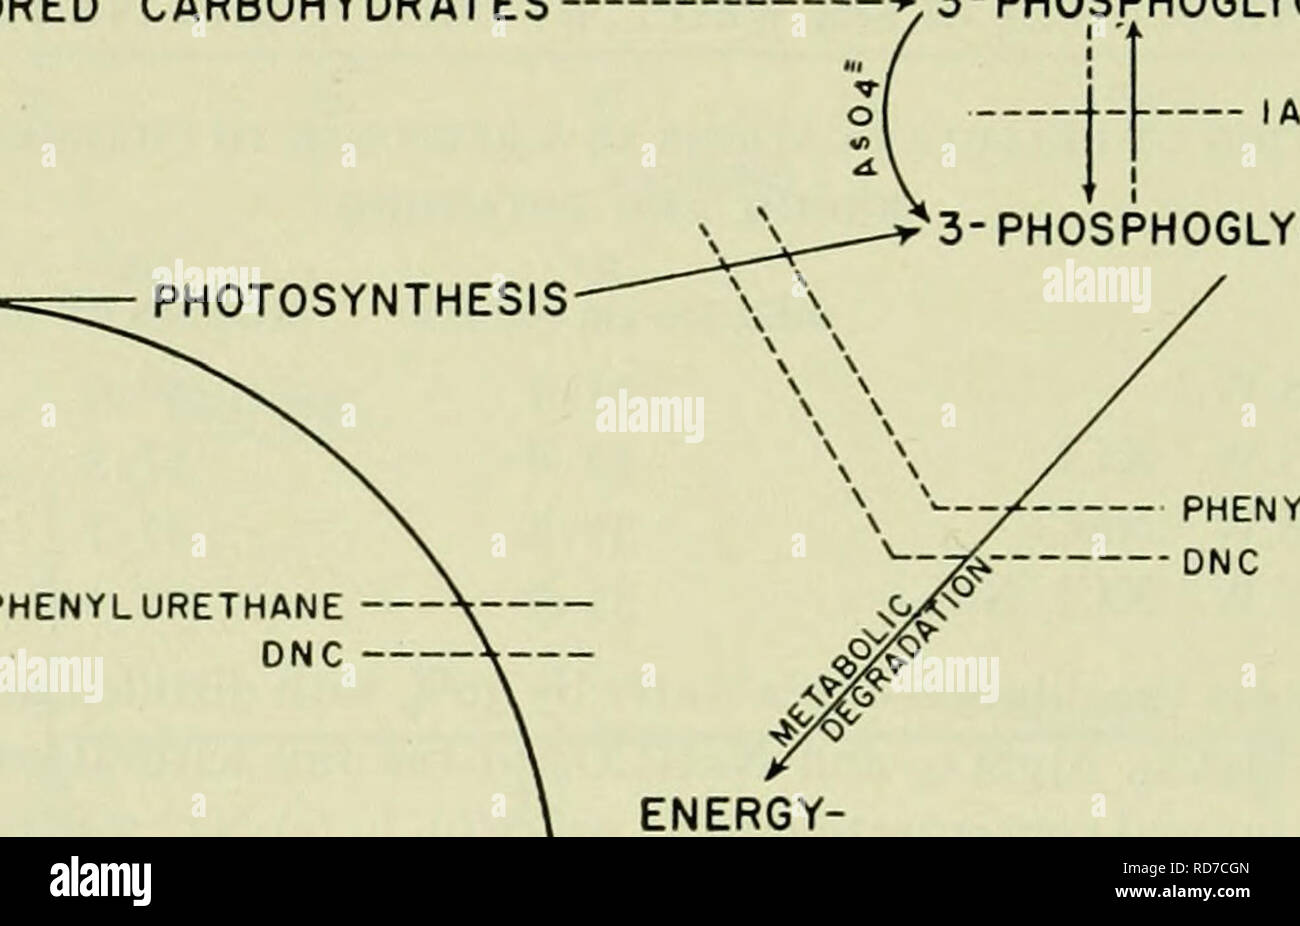 . Electrolytes in biological systems, incorporating papers presented at a symposium at the Marine Biological Laboratory in Woods Hole, Massachusetts, on September 8, 1954. Electrophysiology; Electrolytes; Electrolytes; Electrophysiology; Physiology, Comparative. 62 ELECTROLYTES IN BIOLOGICAL SYSTEMS of potassium and the secretion of sodium, that these mechanisms are inde- pendent of each other, and that they are energized by the metaboHc degrada- tion of carbohydrate (fig. 21). Any comparison between Ulva and Valonia must take cognizance of the morphological differences between the cells of th Stock Photo